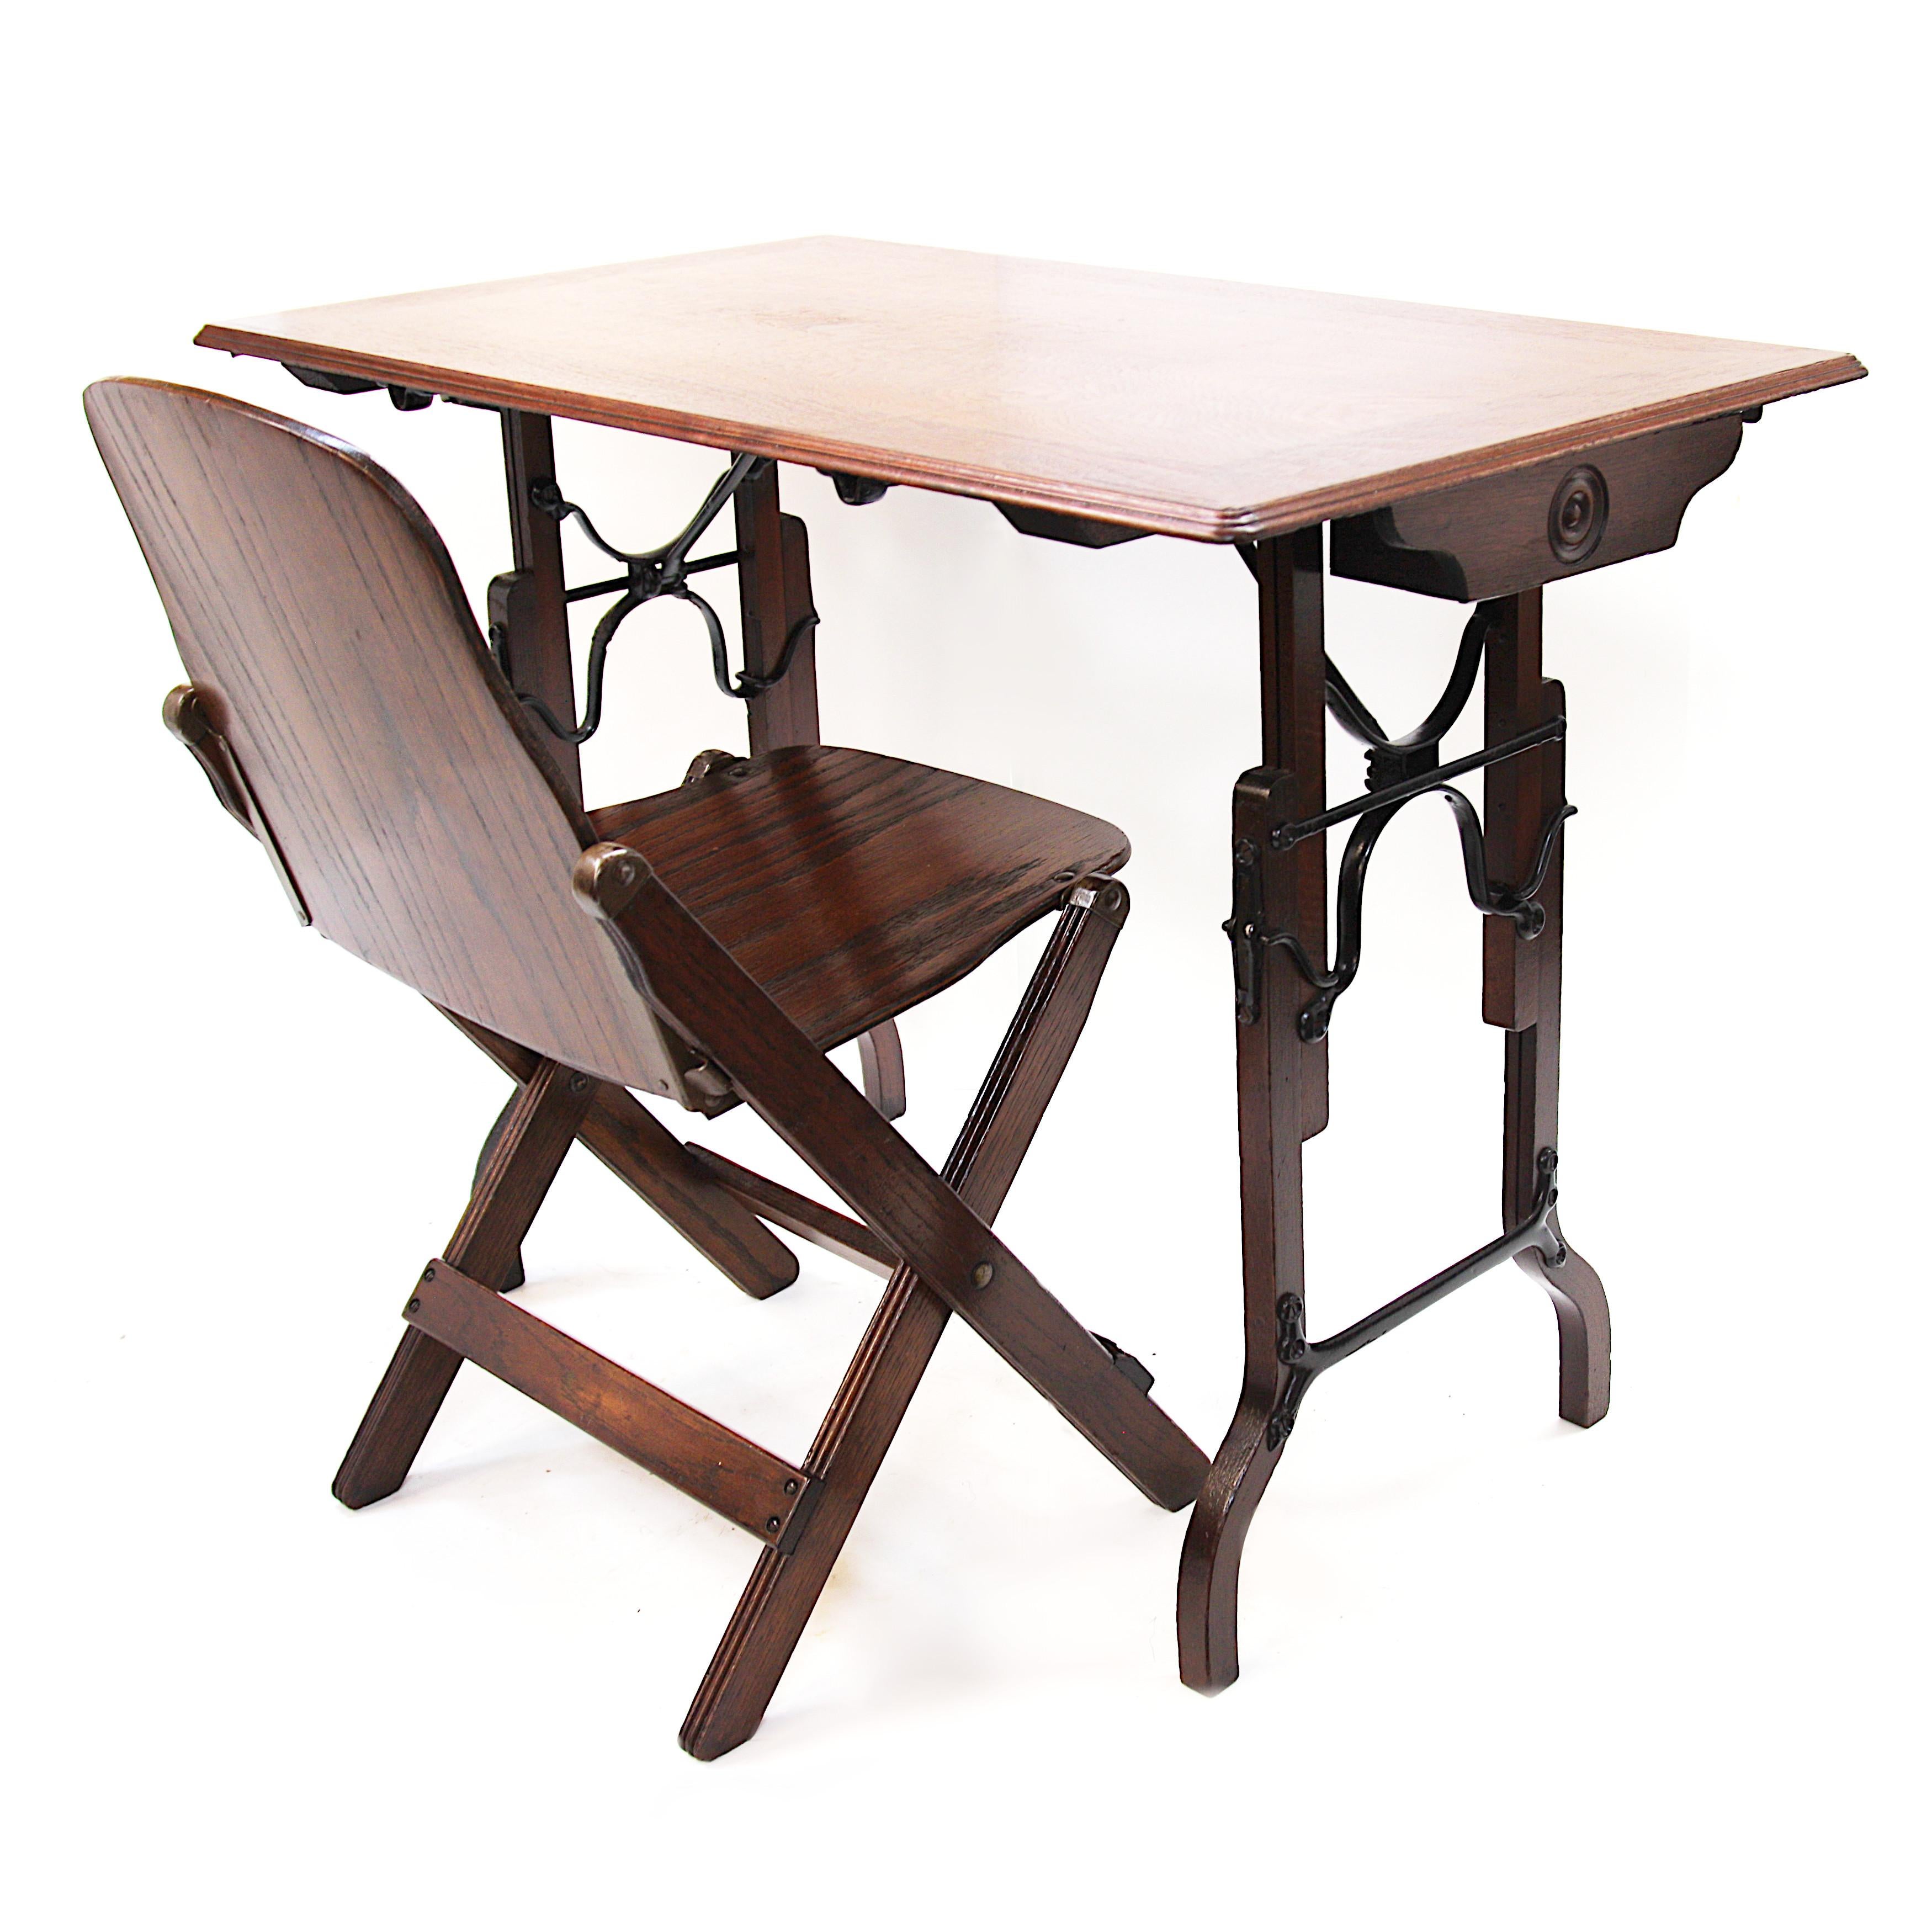 A rare example of the Lambie & Sargent Utility Adjustable Table circa 1870's. The table is best described by the 1874 article entitled 